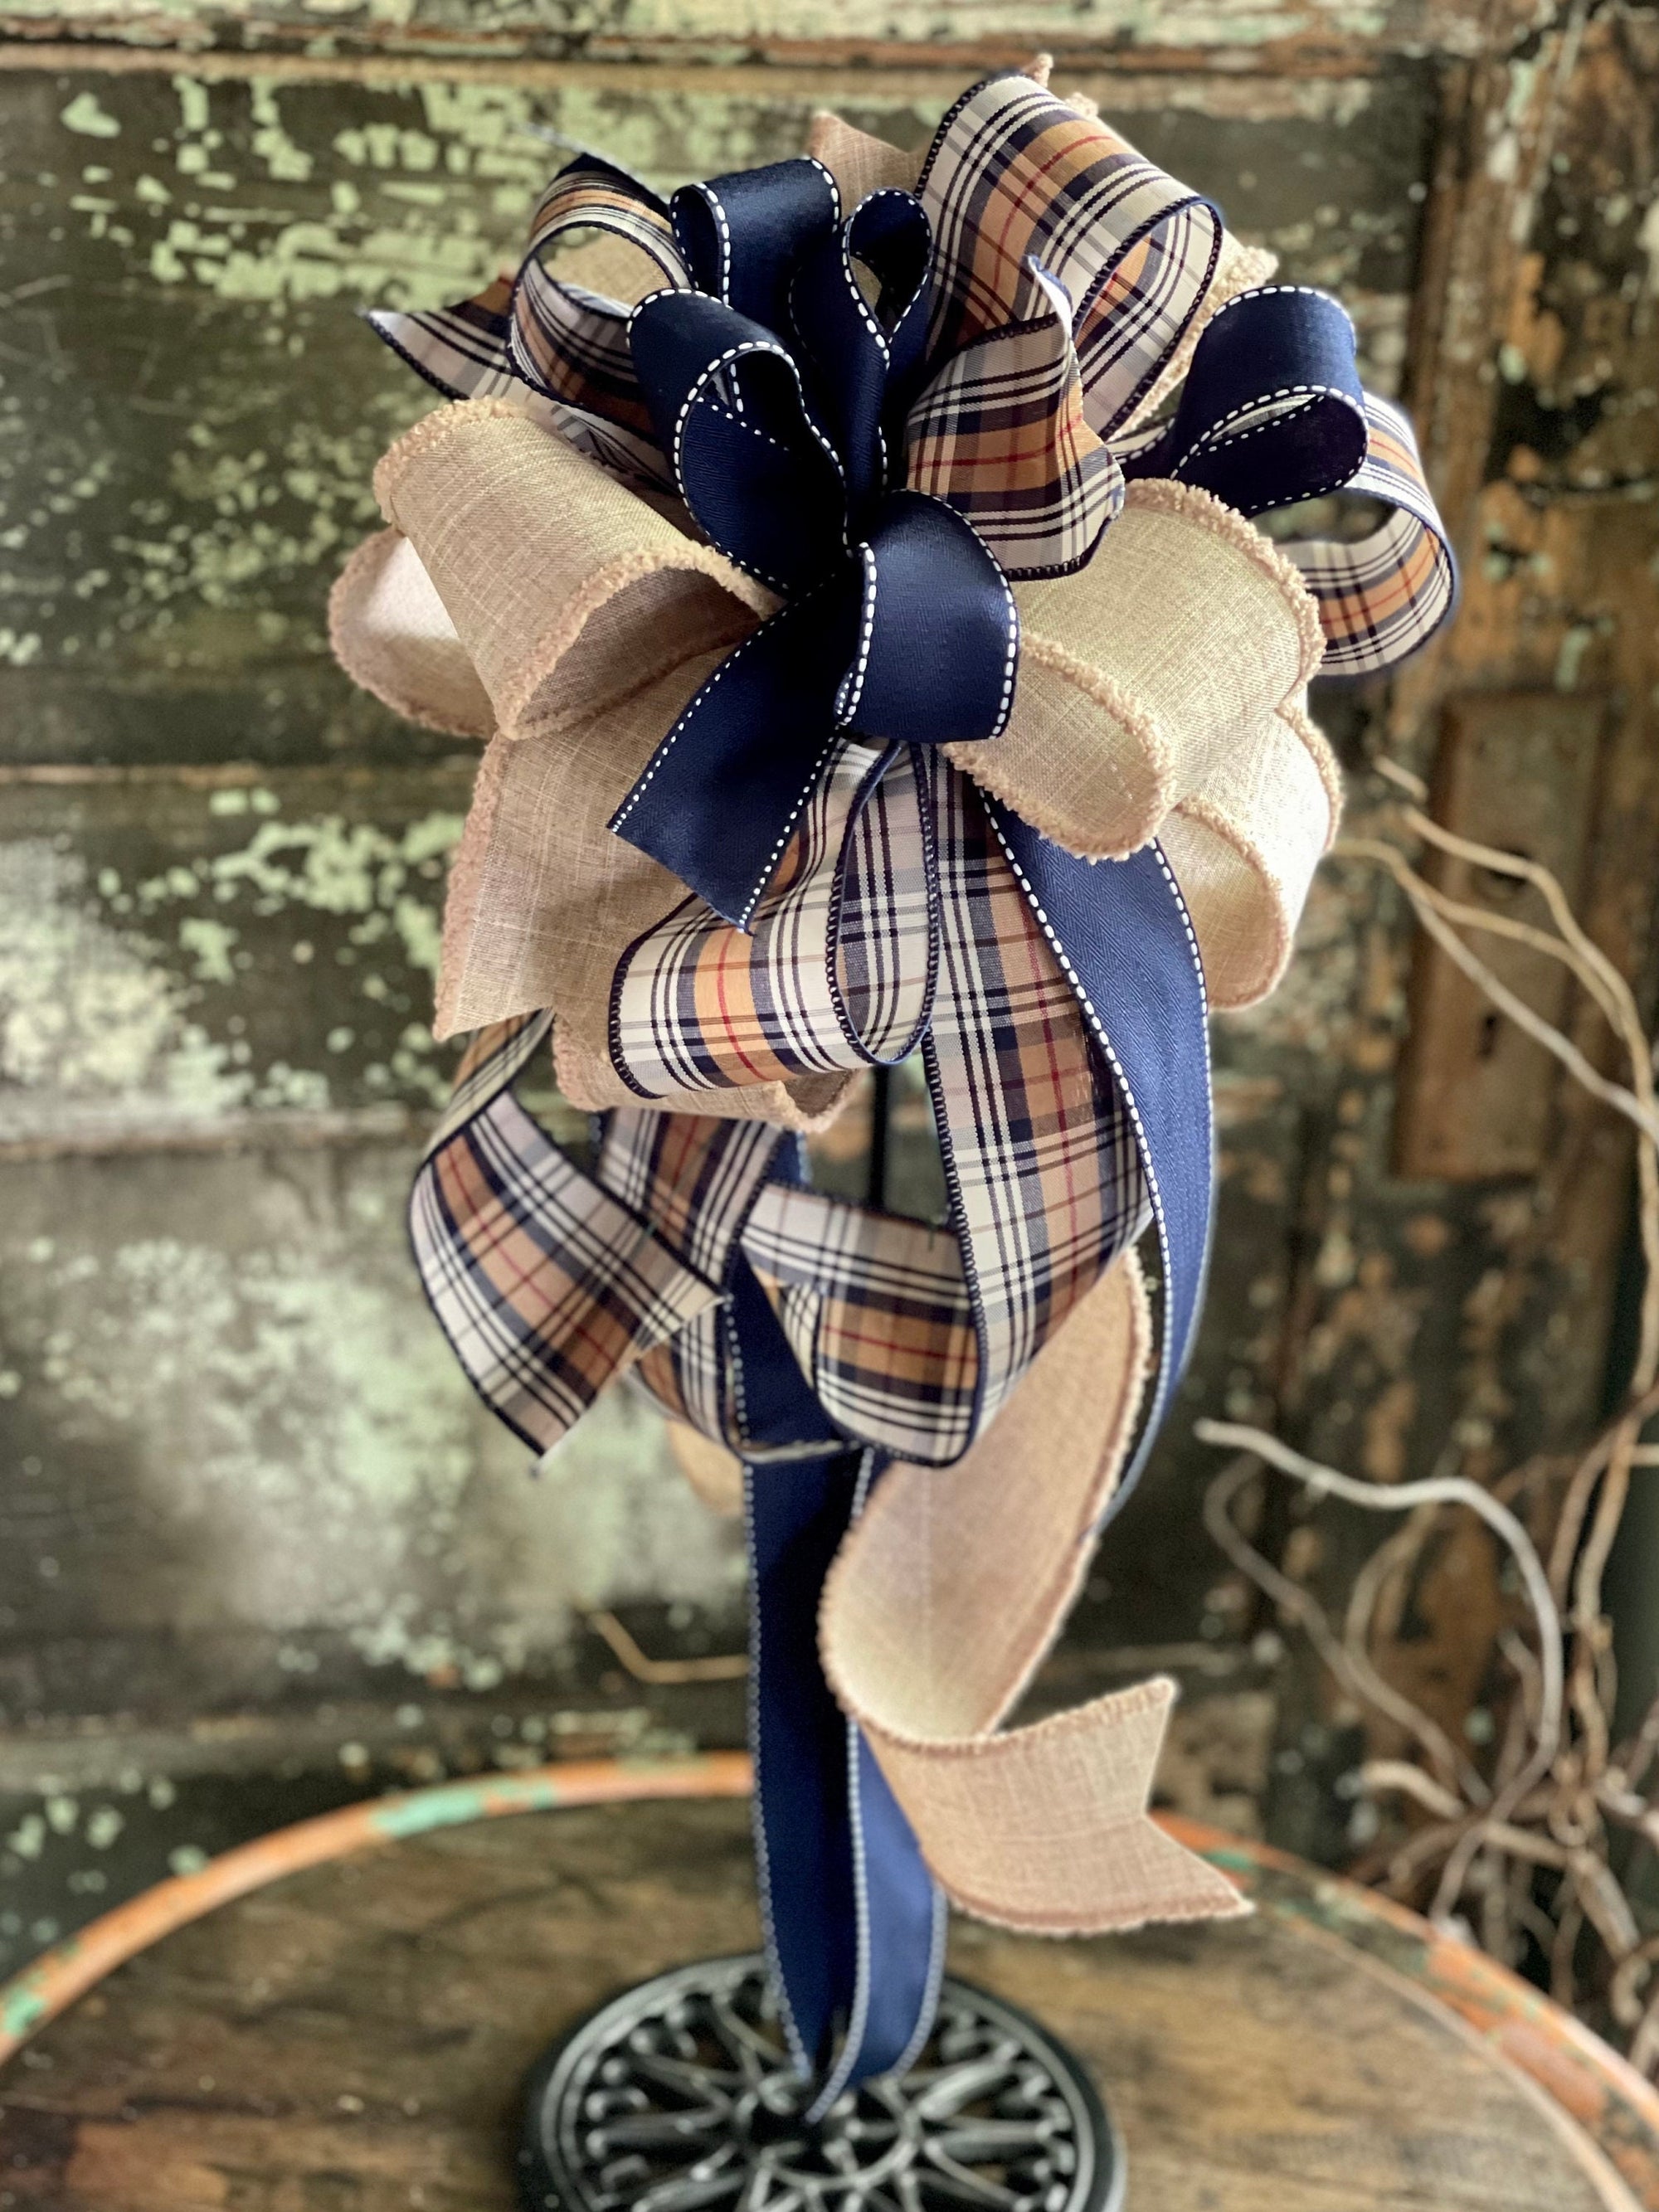 The Lapis Navy Blue Tan Plaid Bow For Wreaths